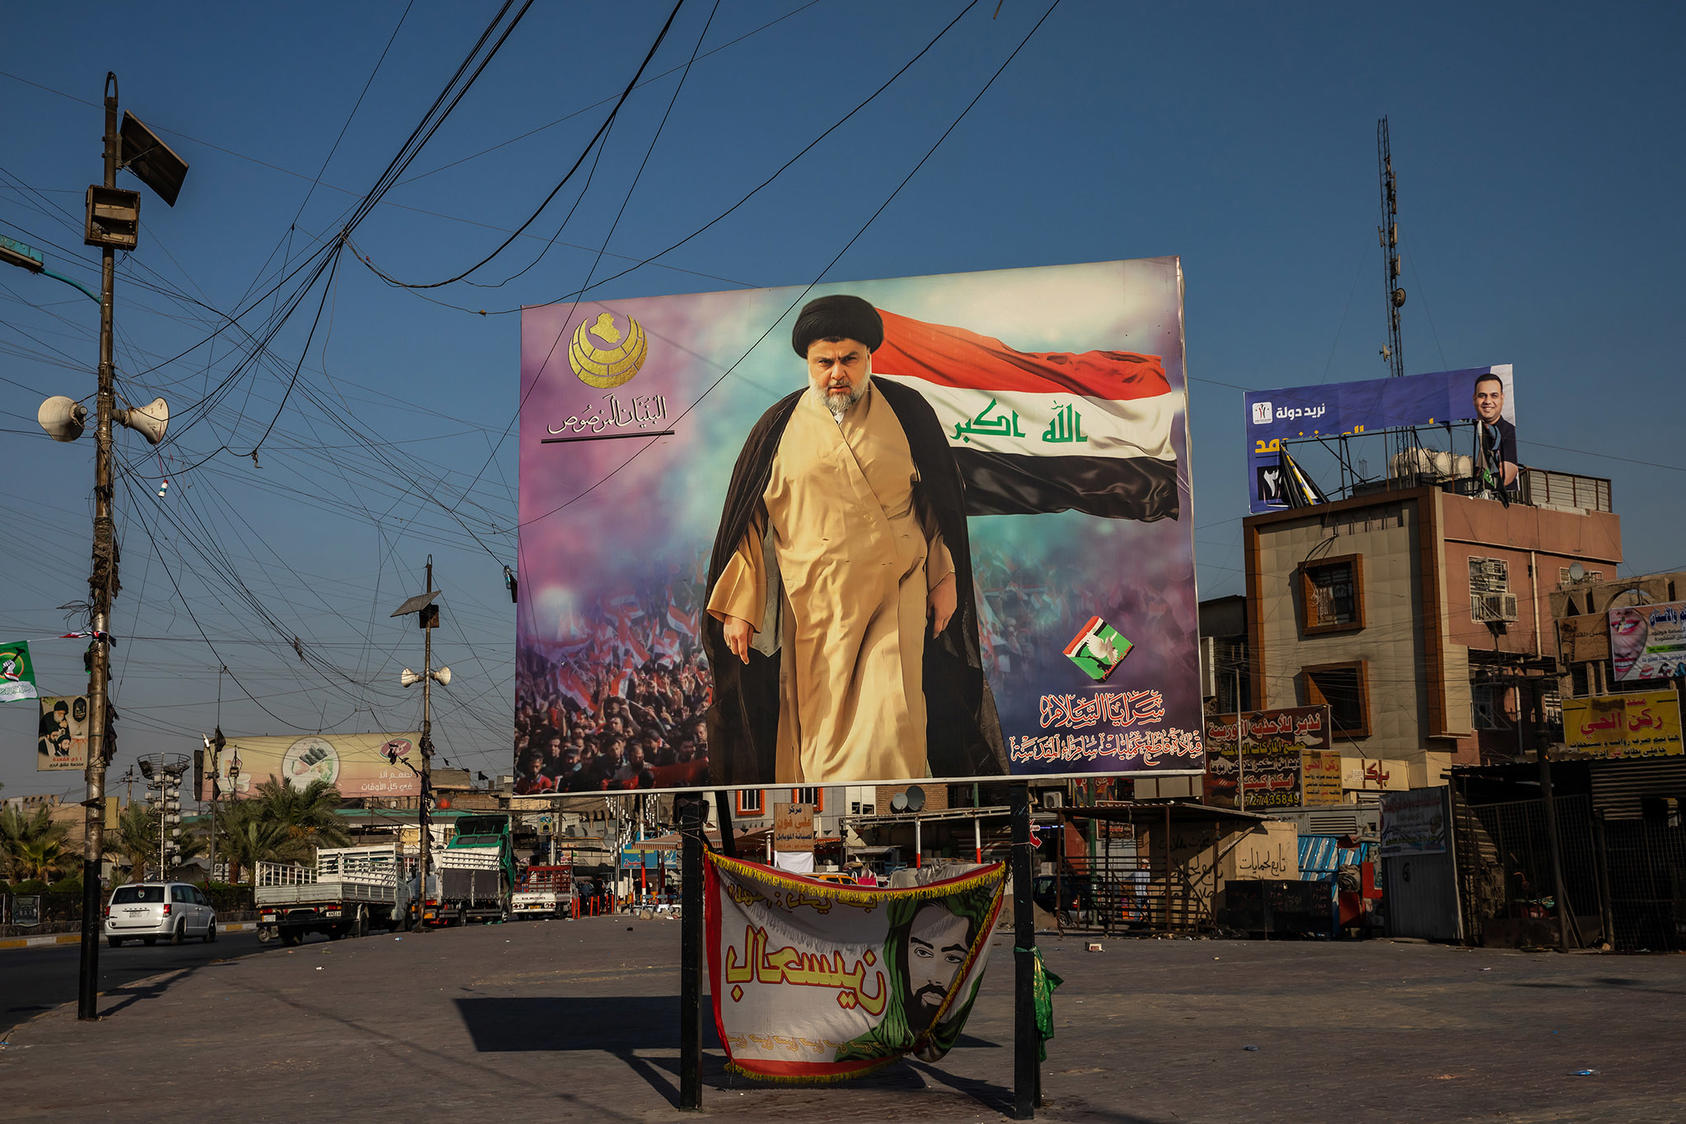 A poster of the Shiite cleric Moktada al-Sadr in the Sadr City neighborhood of Baghdad. September 30, 2021. (Andrea DiCenzo/The New York Times)